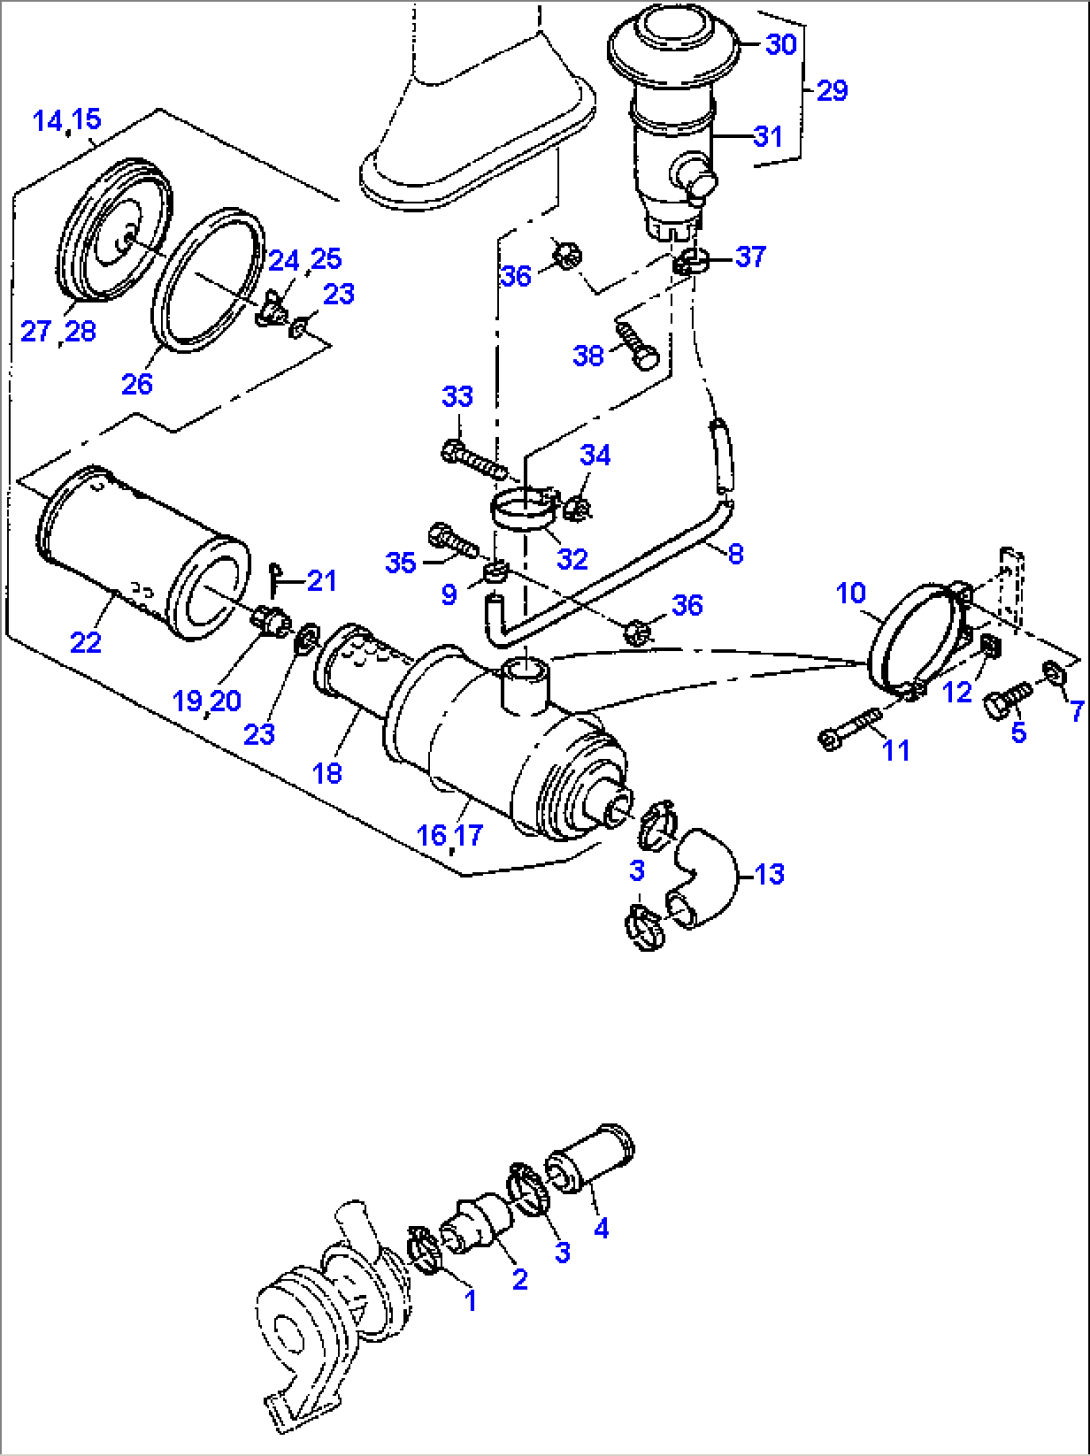 AIR FILTER SYSTEM, EJECTOR